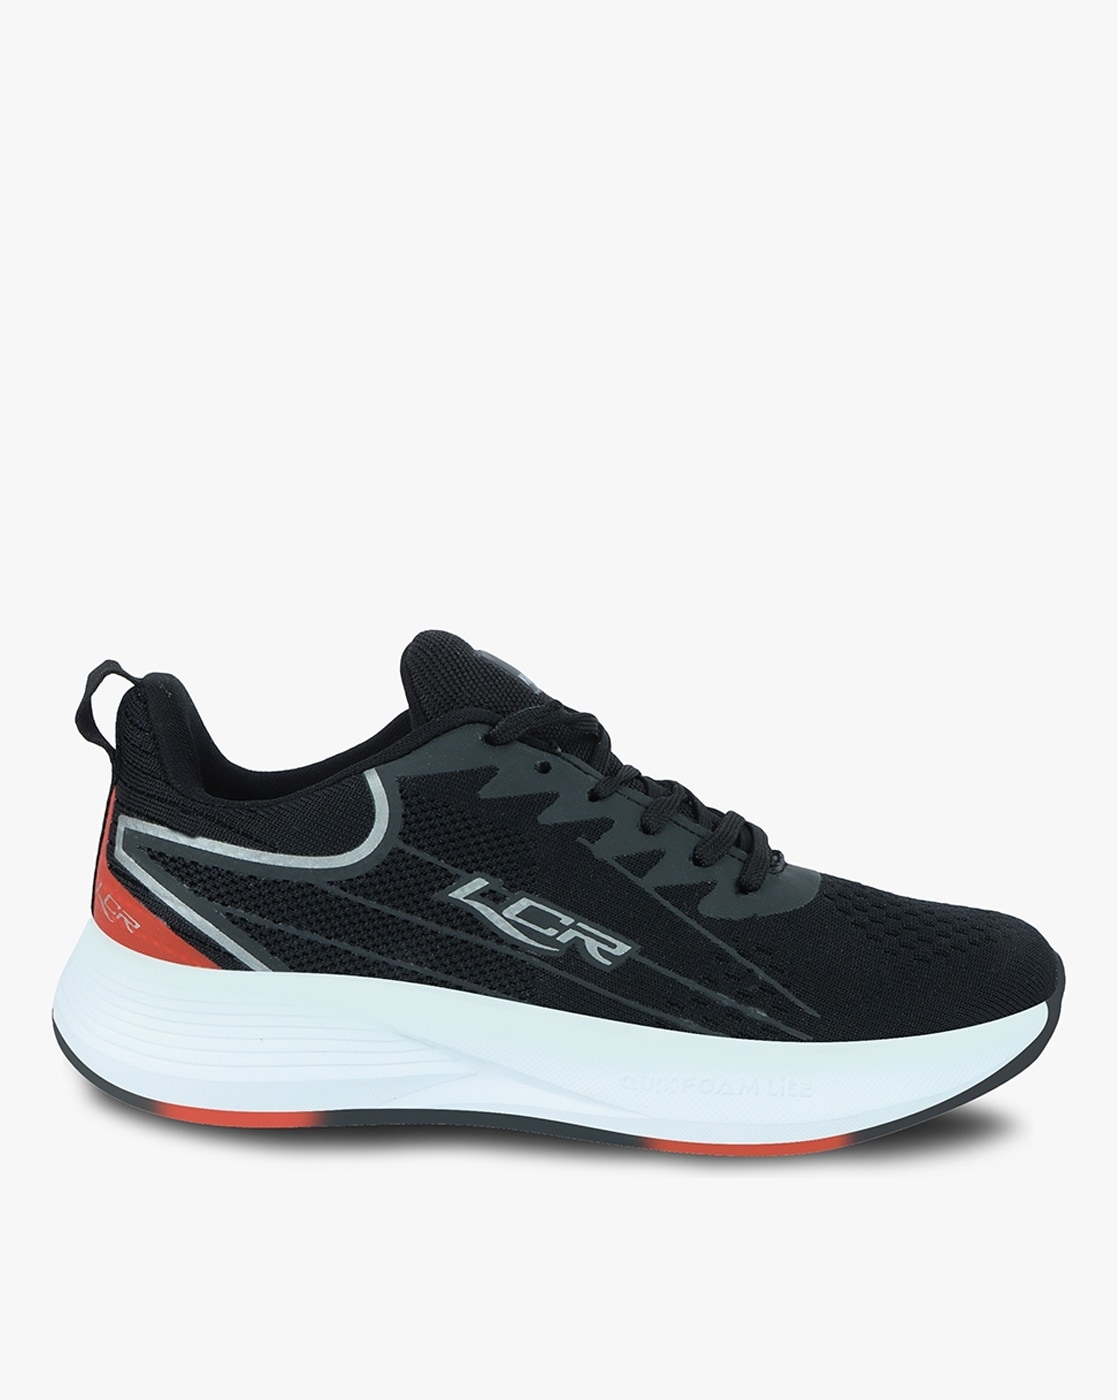 Buy lcr sports shoes green 7 in India @ Limeroad-totobed.com.vn